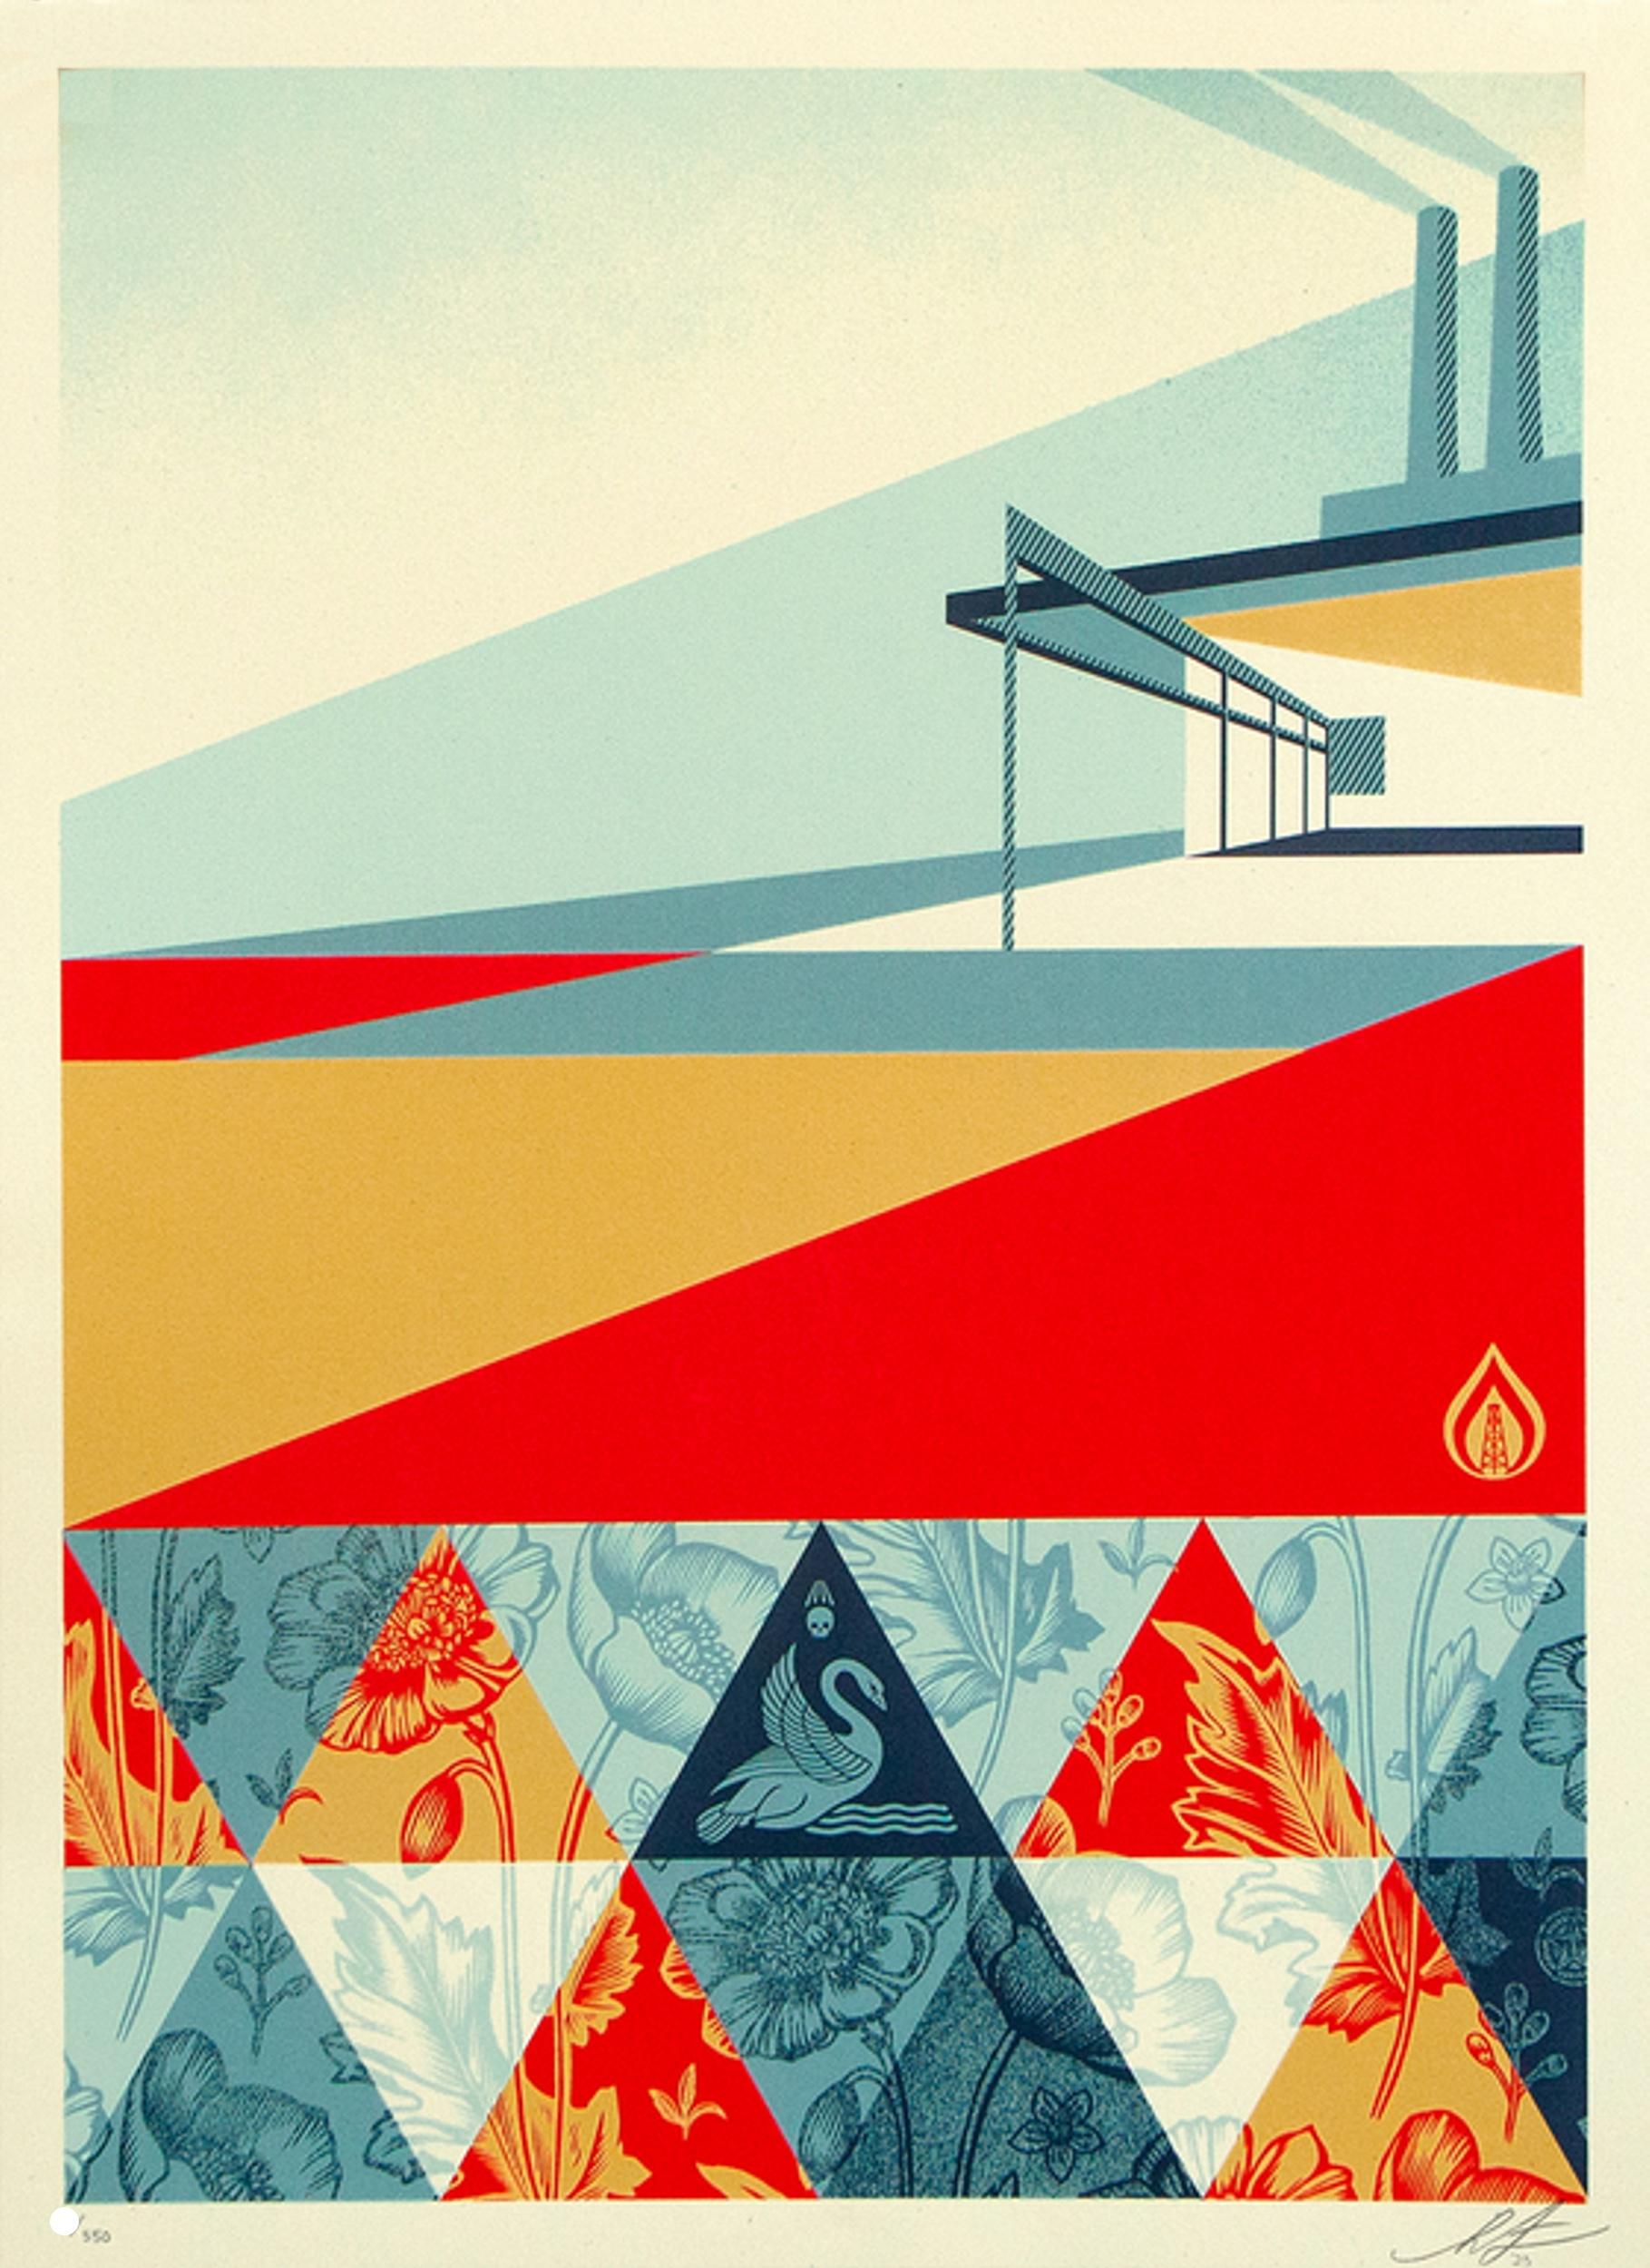 Pattern of Denial (Mid-Century Architecture, Fossil Fuels, Deluxe Lifestyle) - Print by Shepard Fairey